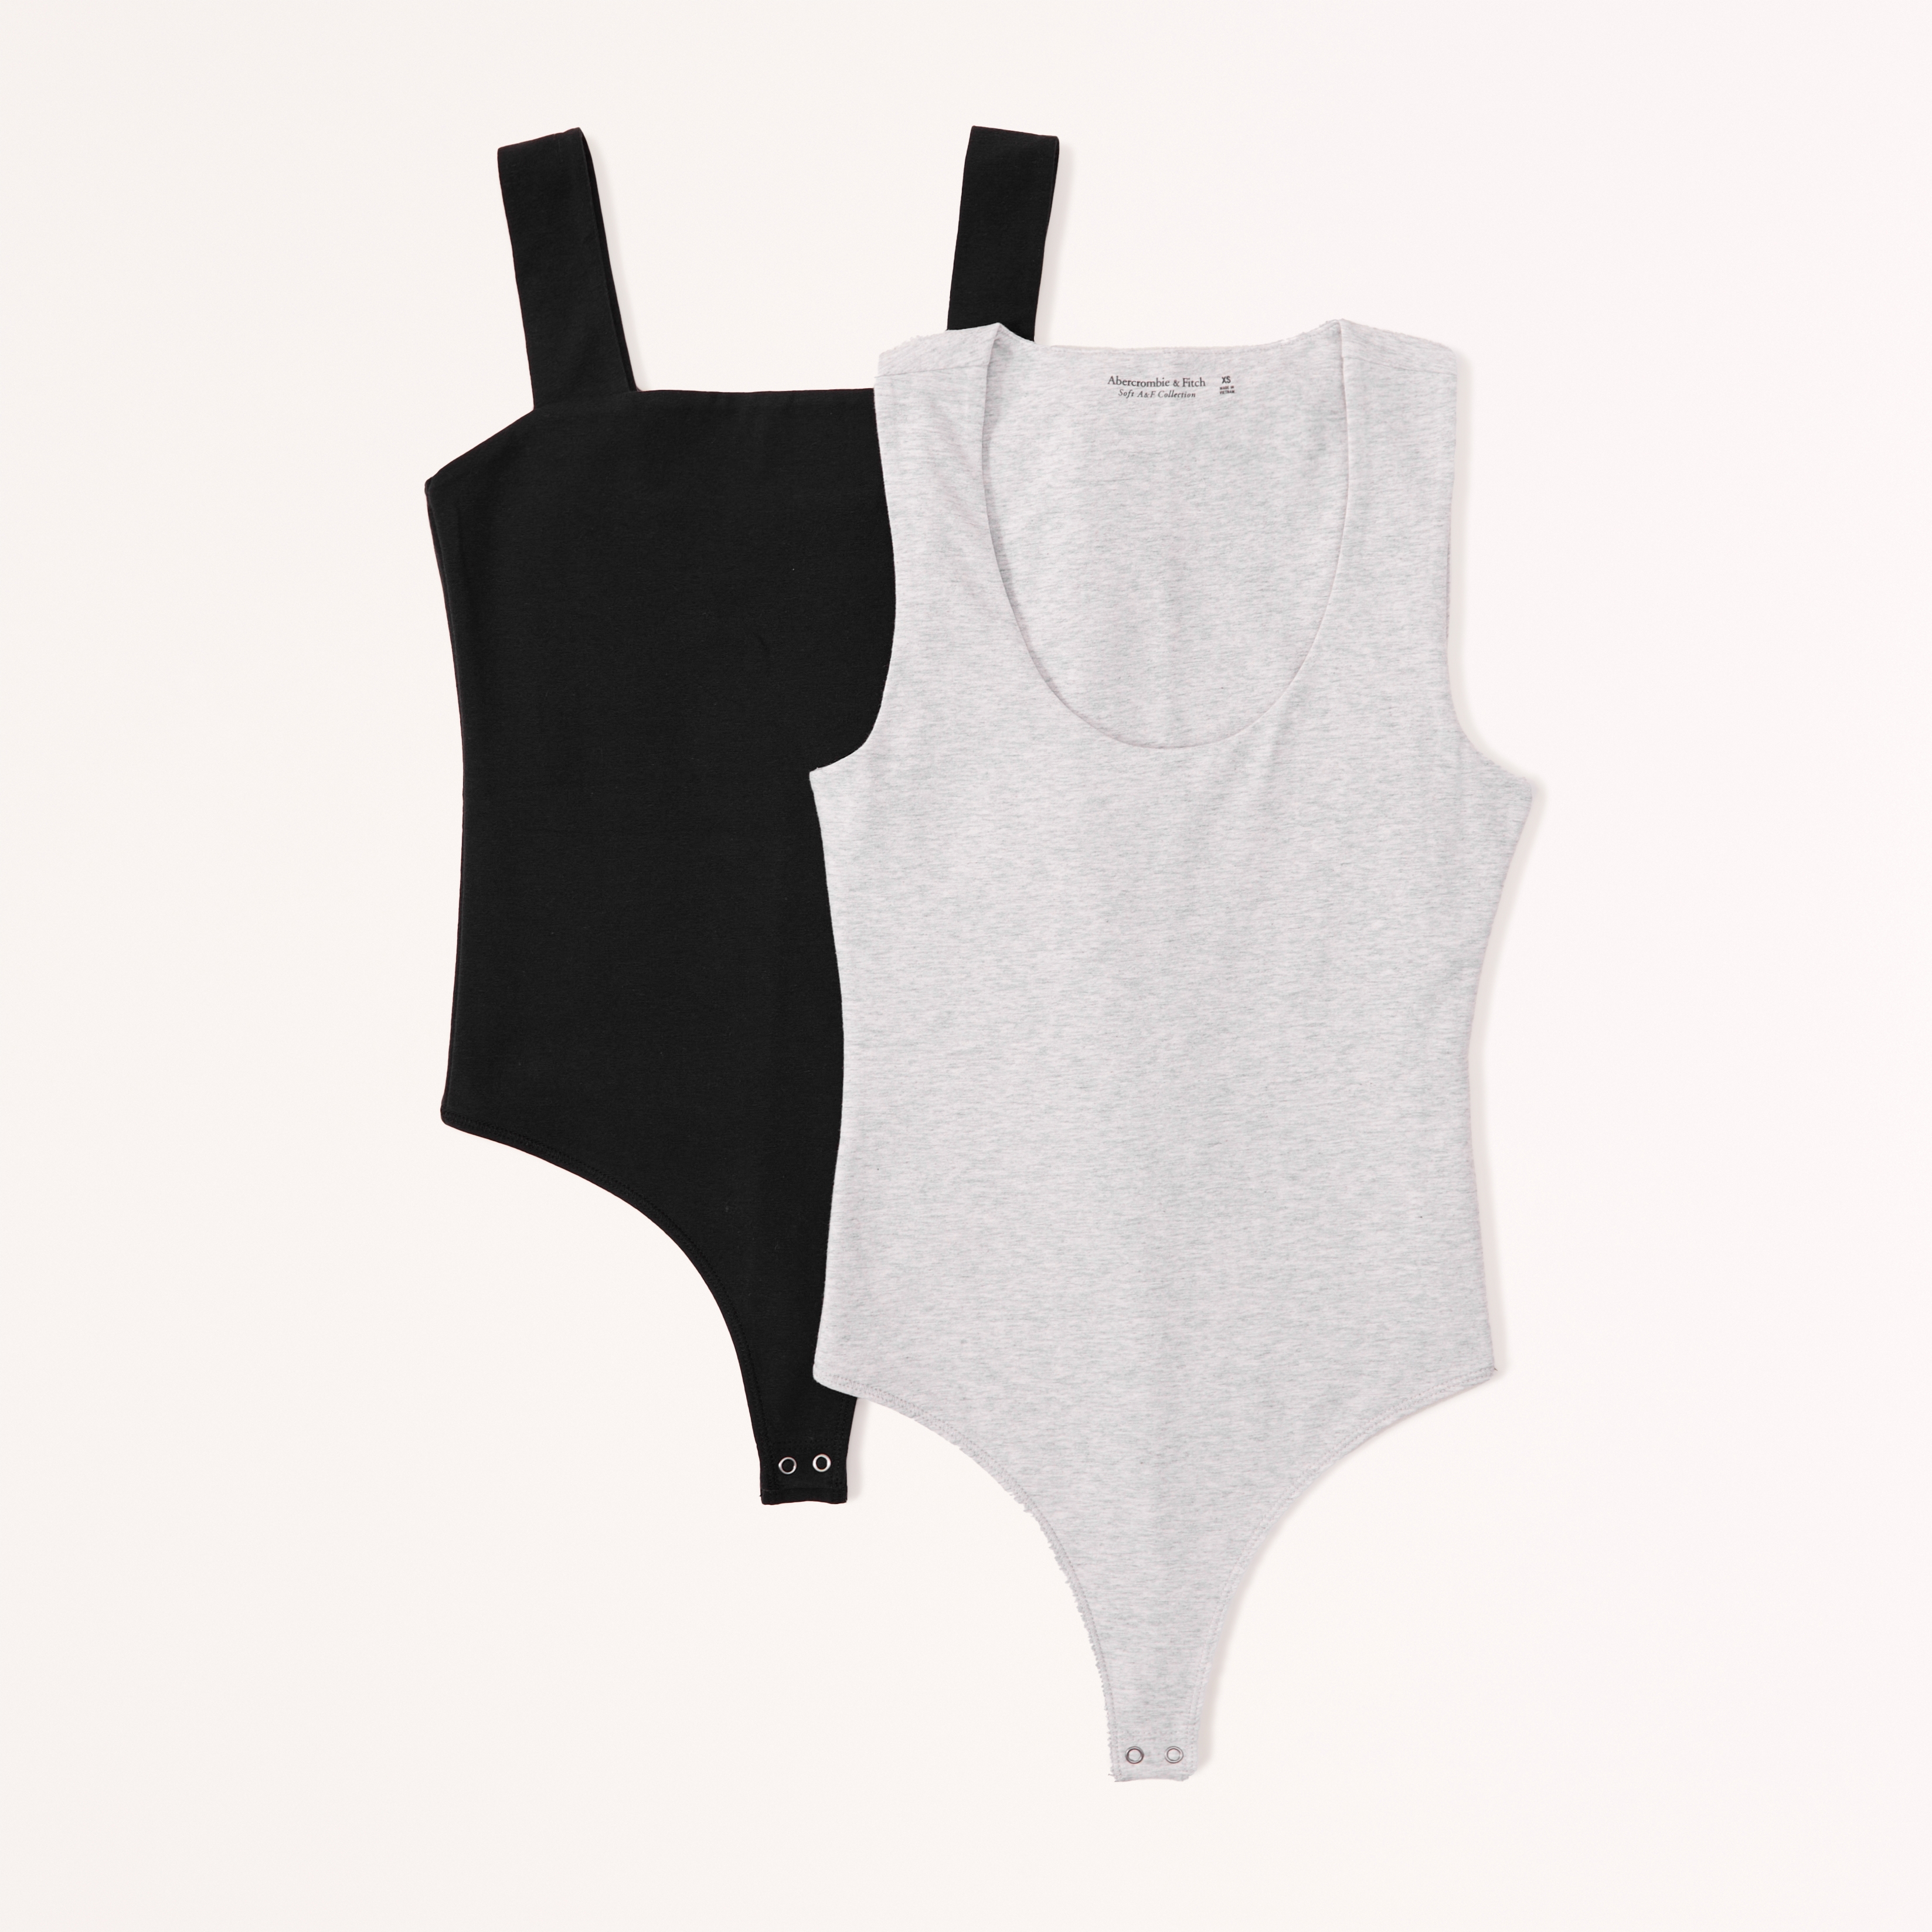 2-Pack Cotton Seamless Fabric Bodysuits